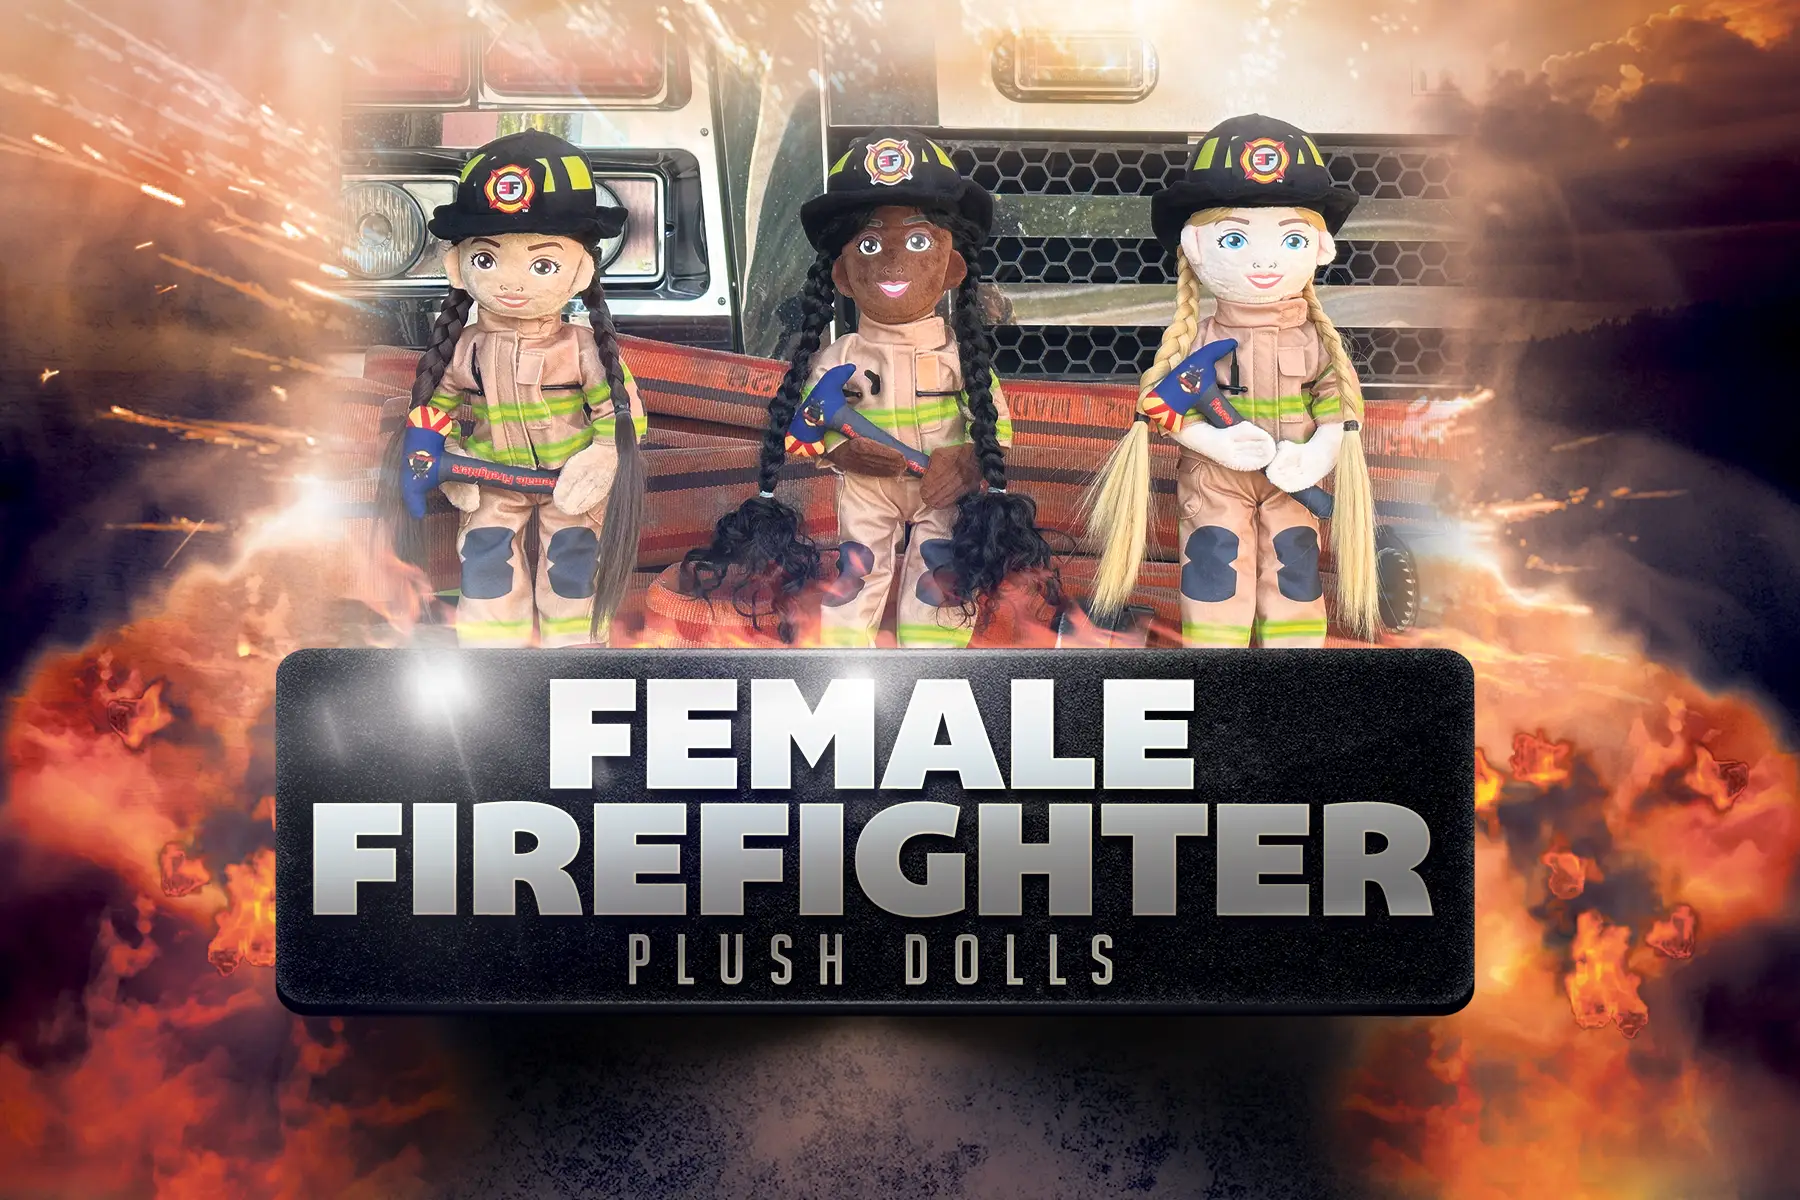 Firefighter-Dolls-Page-Sized